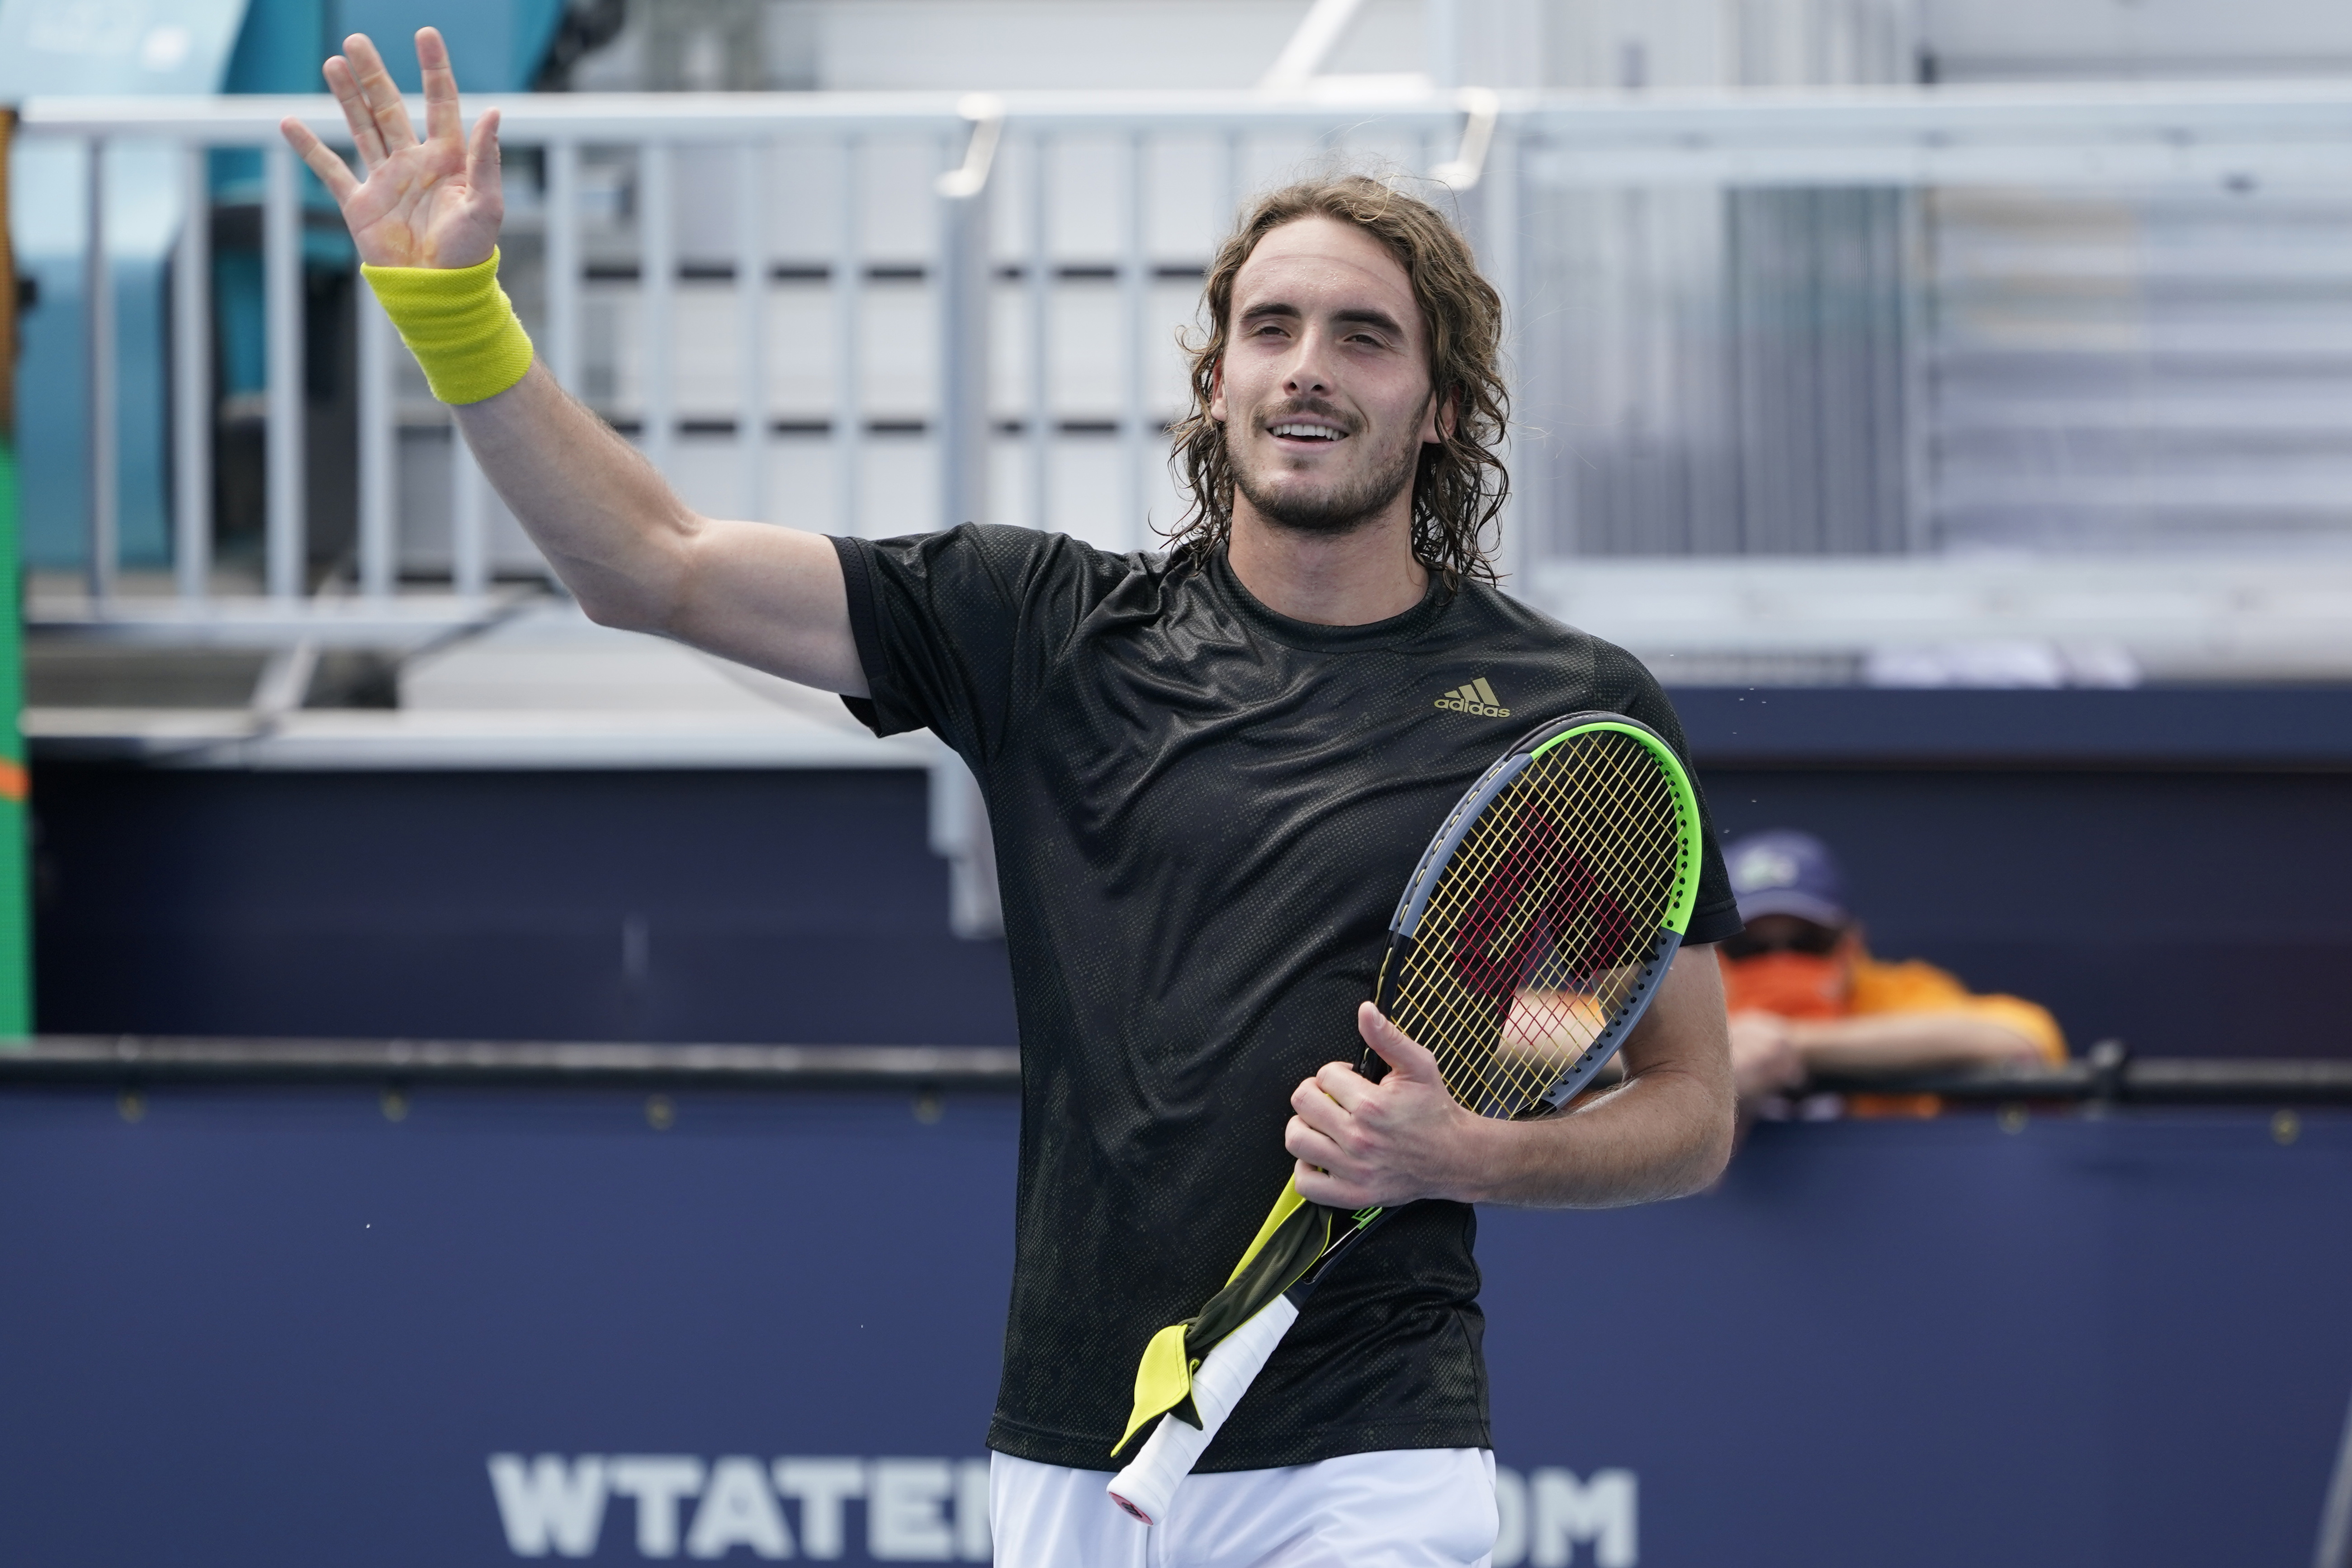 Tsitsipas, with Big Three missing, makes 4th round in Miami